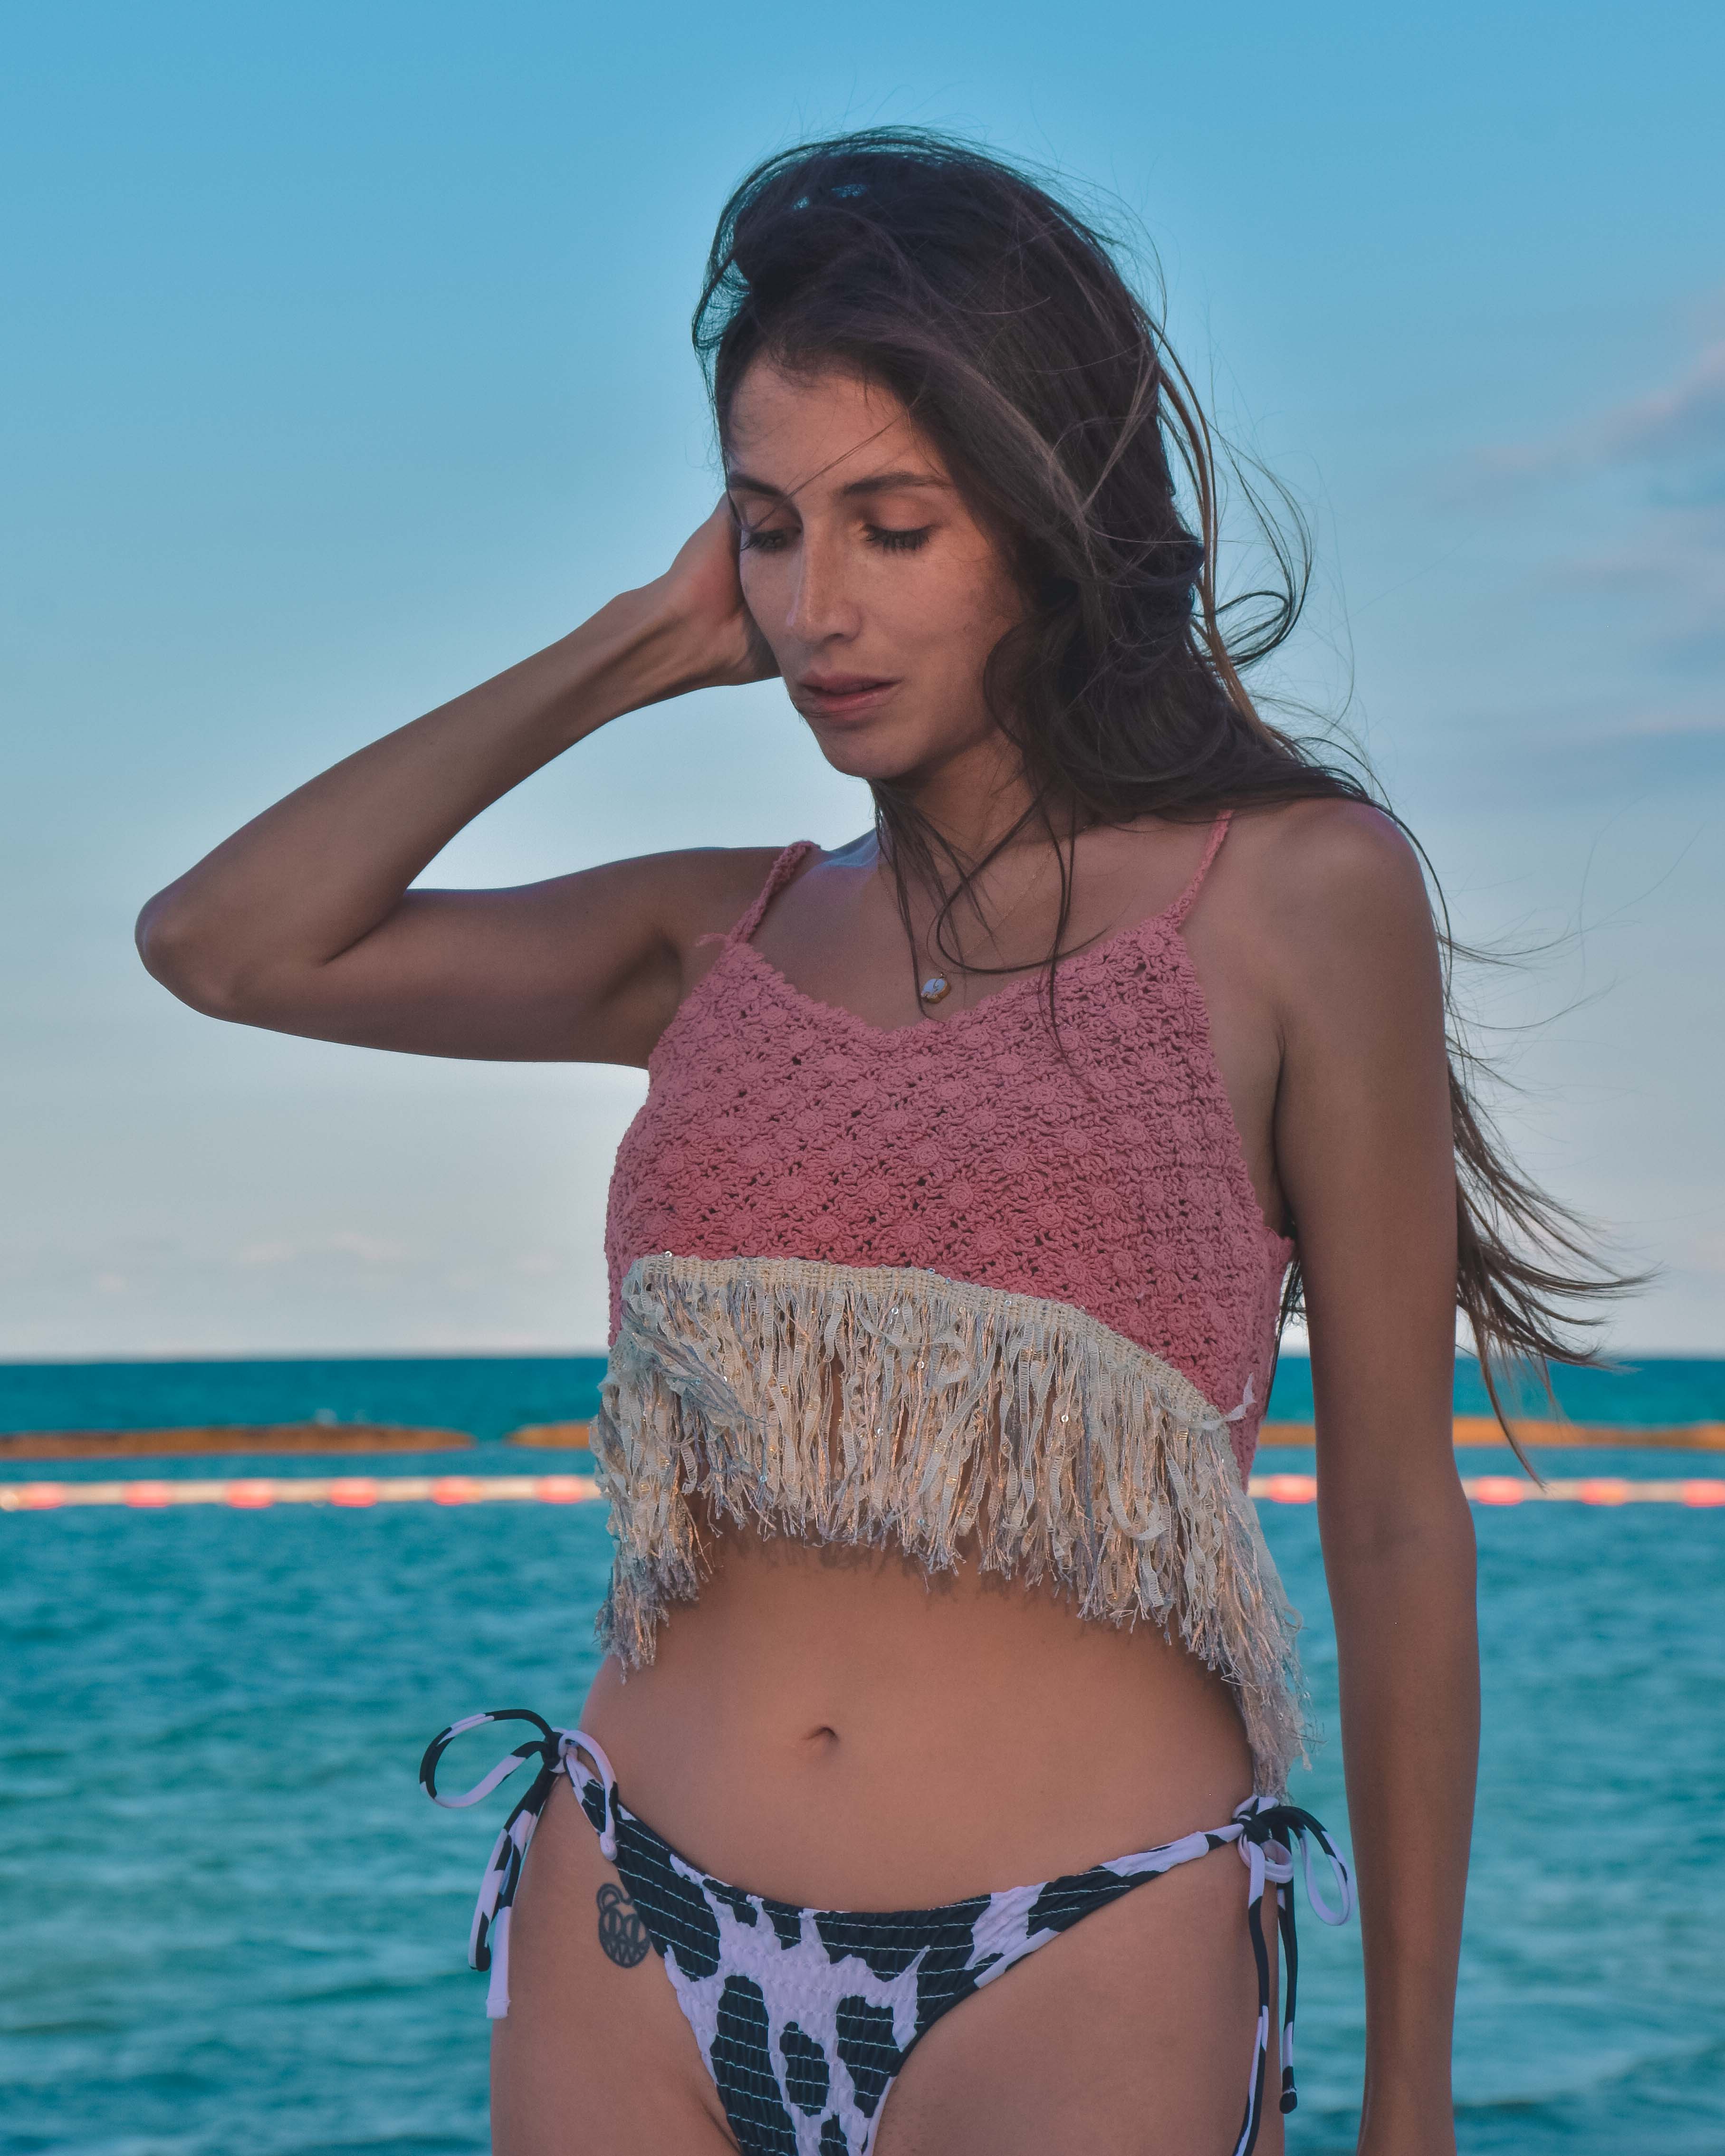 KUXTAL TOP Elepanta Crochet Tops - Buy Today Elephant Pants Jewelry And Bohemian Clothes Handmade In Thailand Help To Save The Elephants FairTrade And Vegan